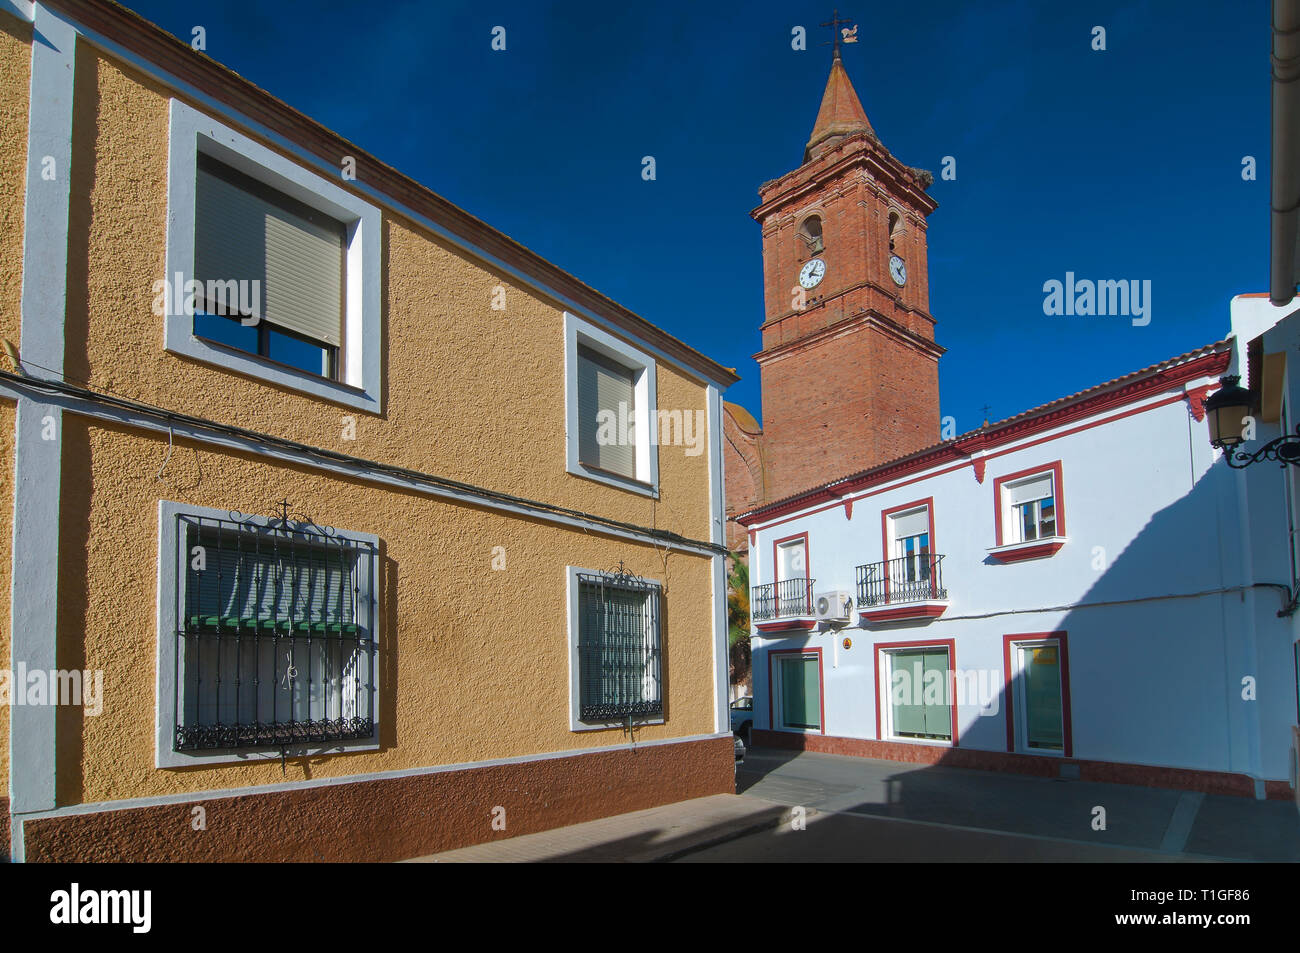 Urban view with the church tower. Alosno. Huelva province. Region of Andalusia. Spain. Europe Stock Photo